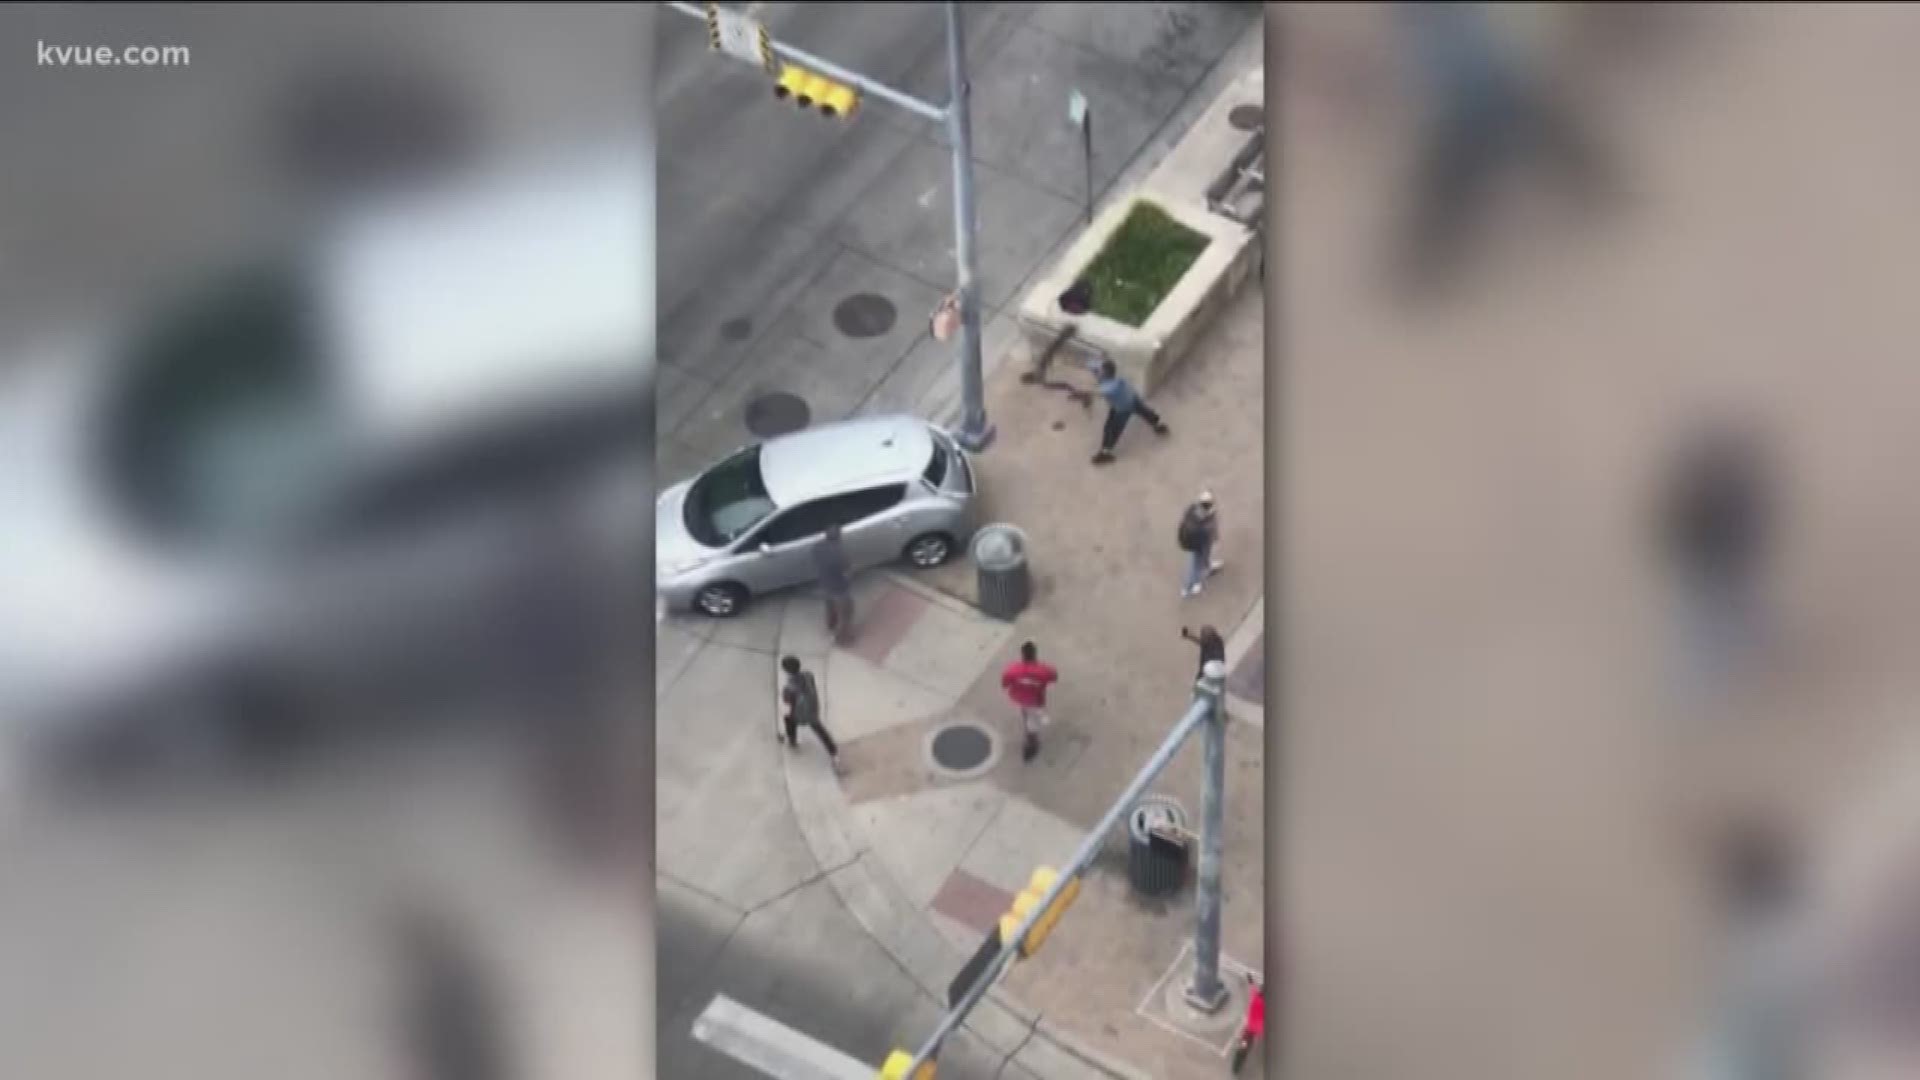 The video shows two men fighting in Downtown Austin before one of them throws a scooter through the back of a car window.